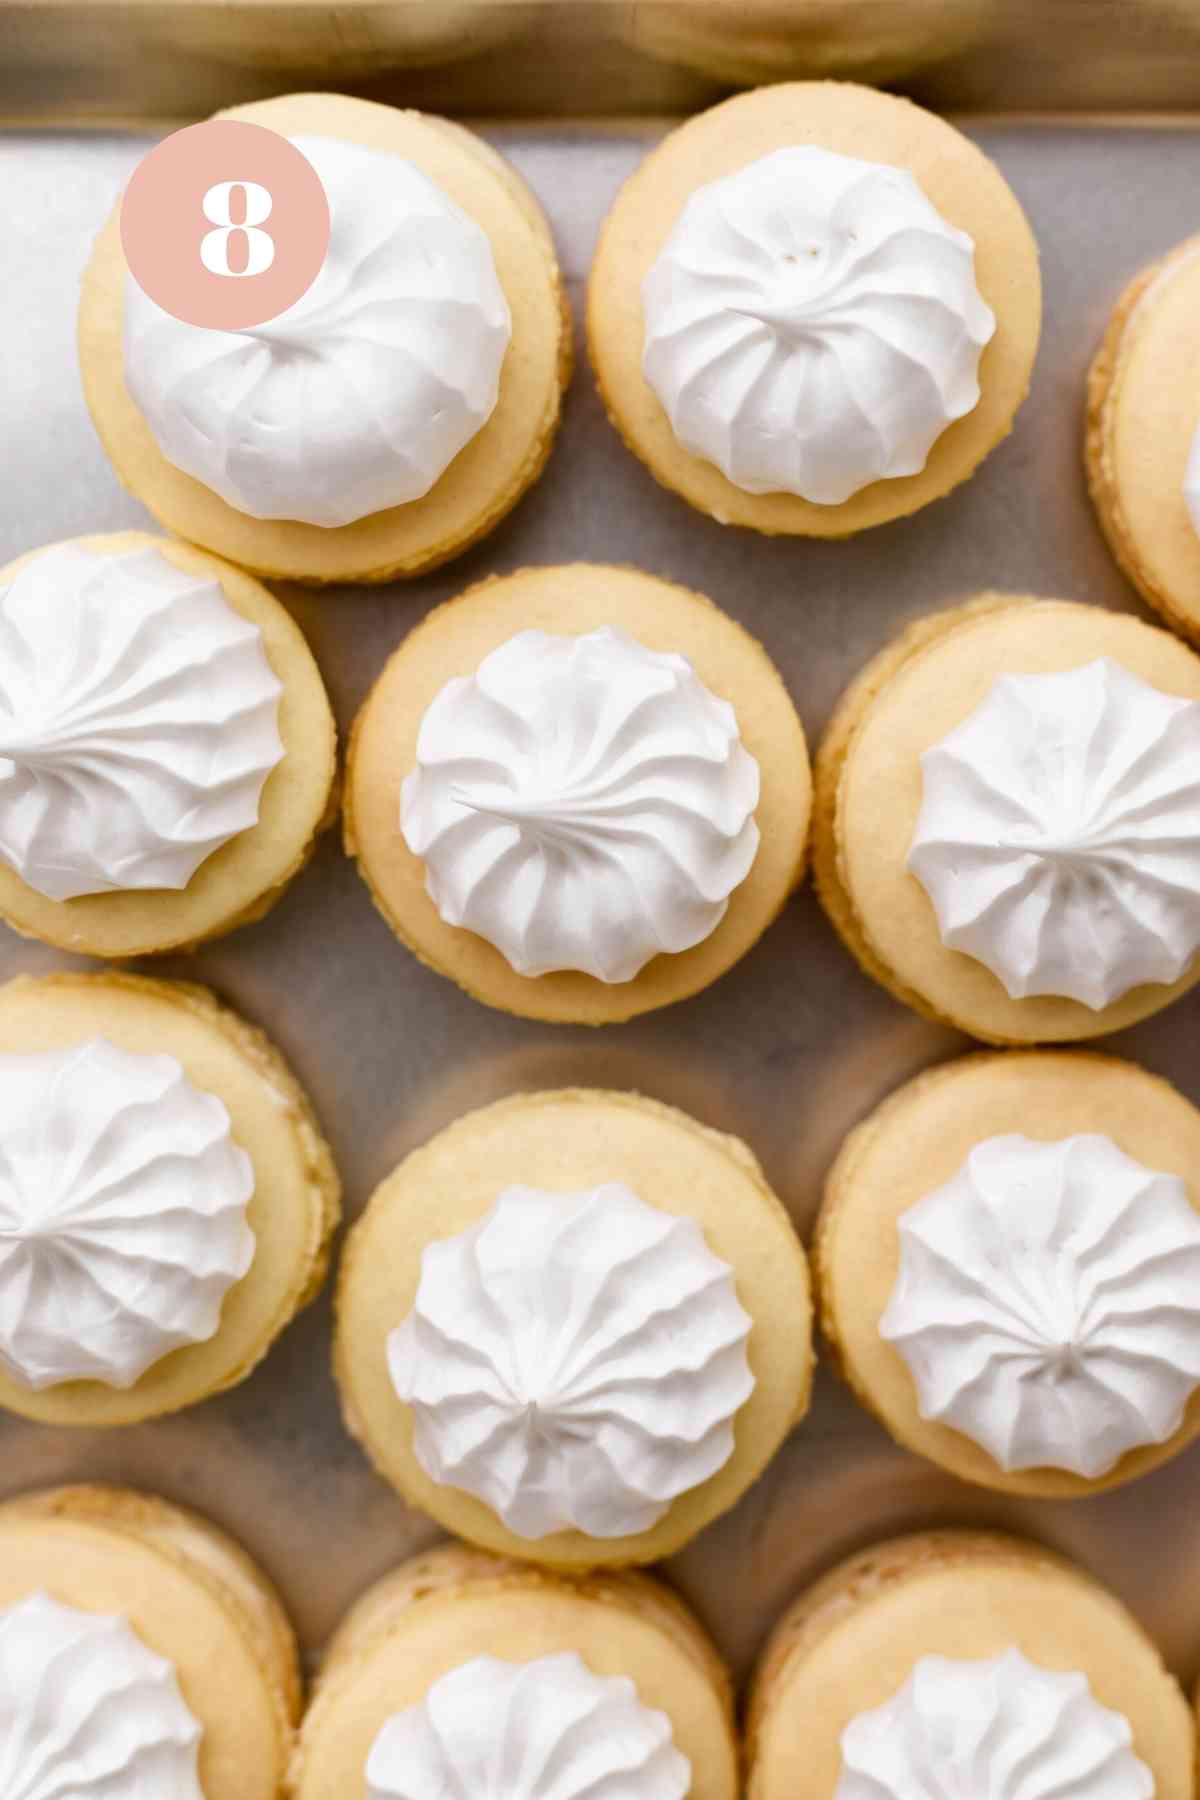 the banana macarons with a meringue topping.